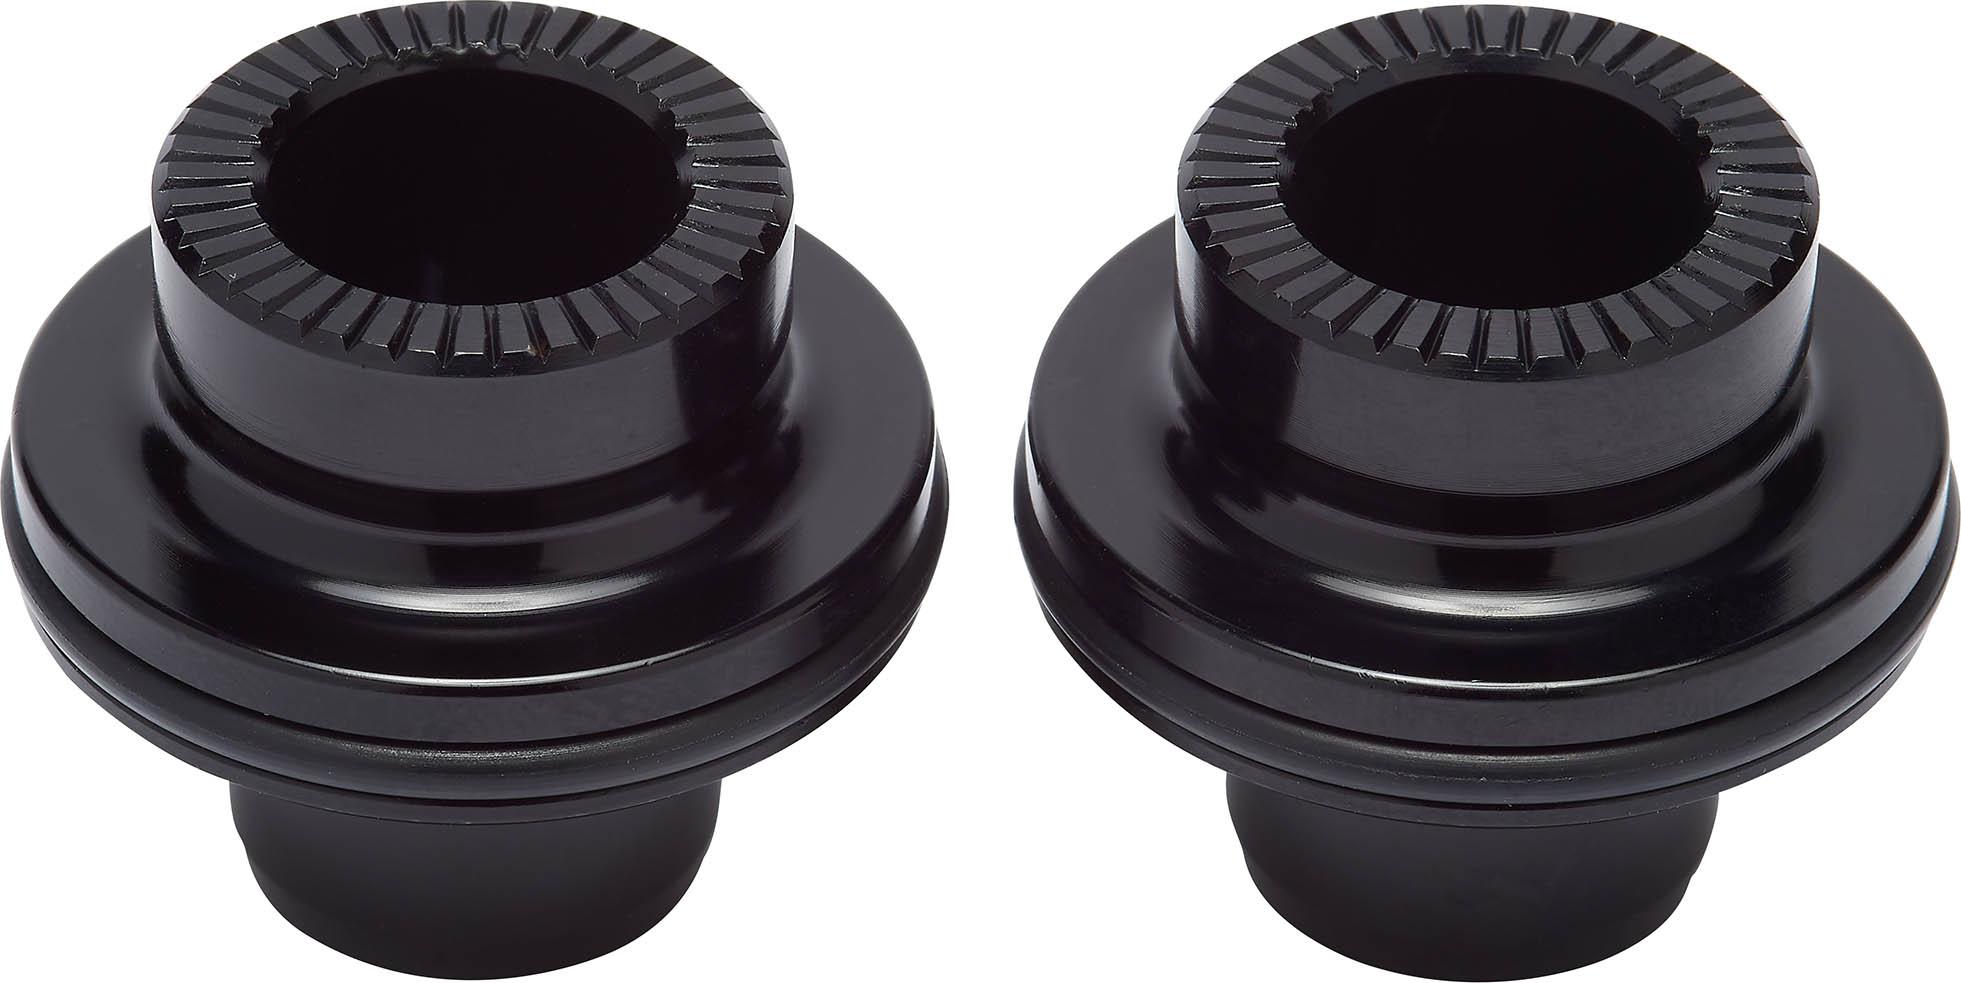 Brand-x Trail 12mm Front End Caps - Black